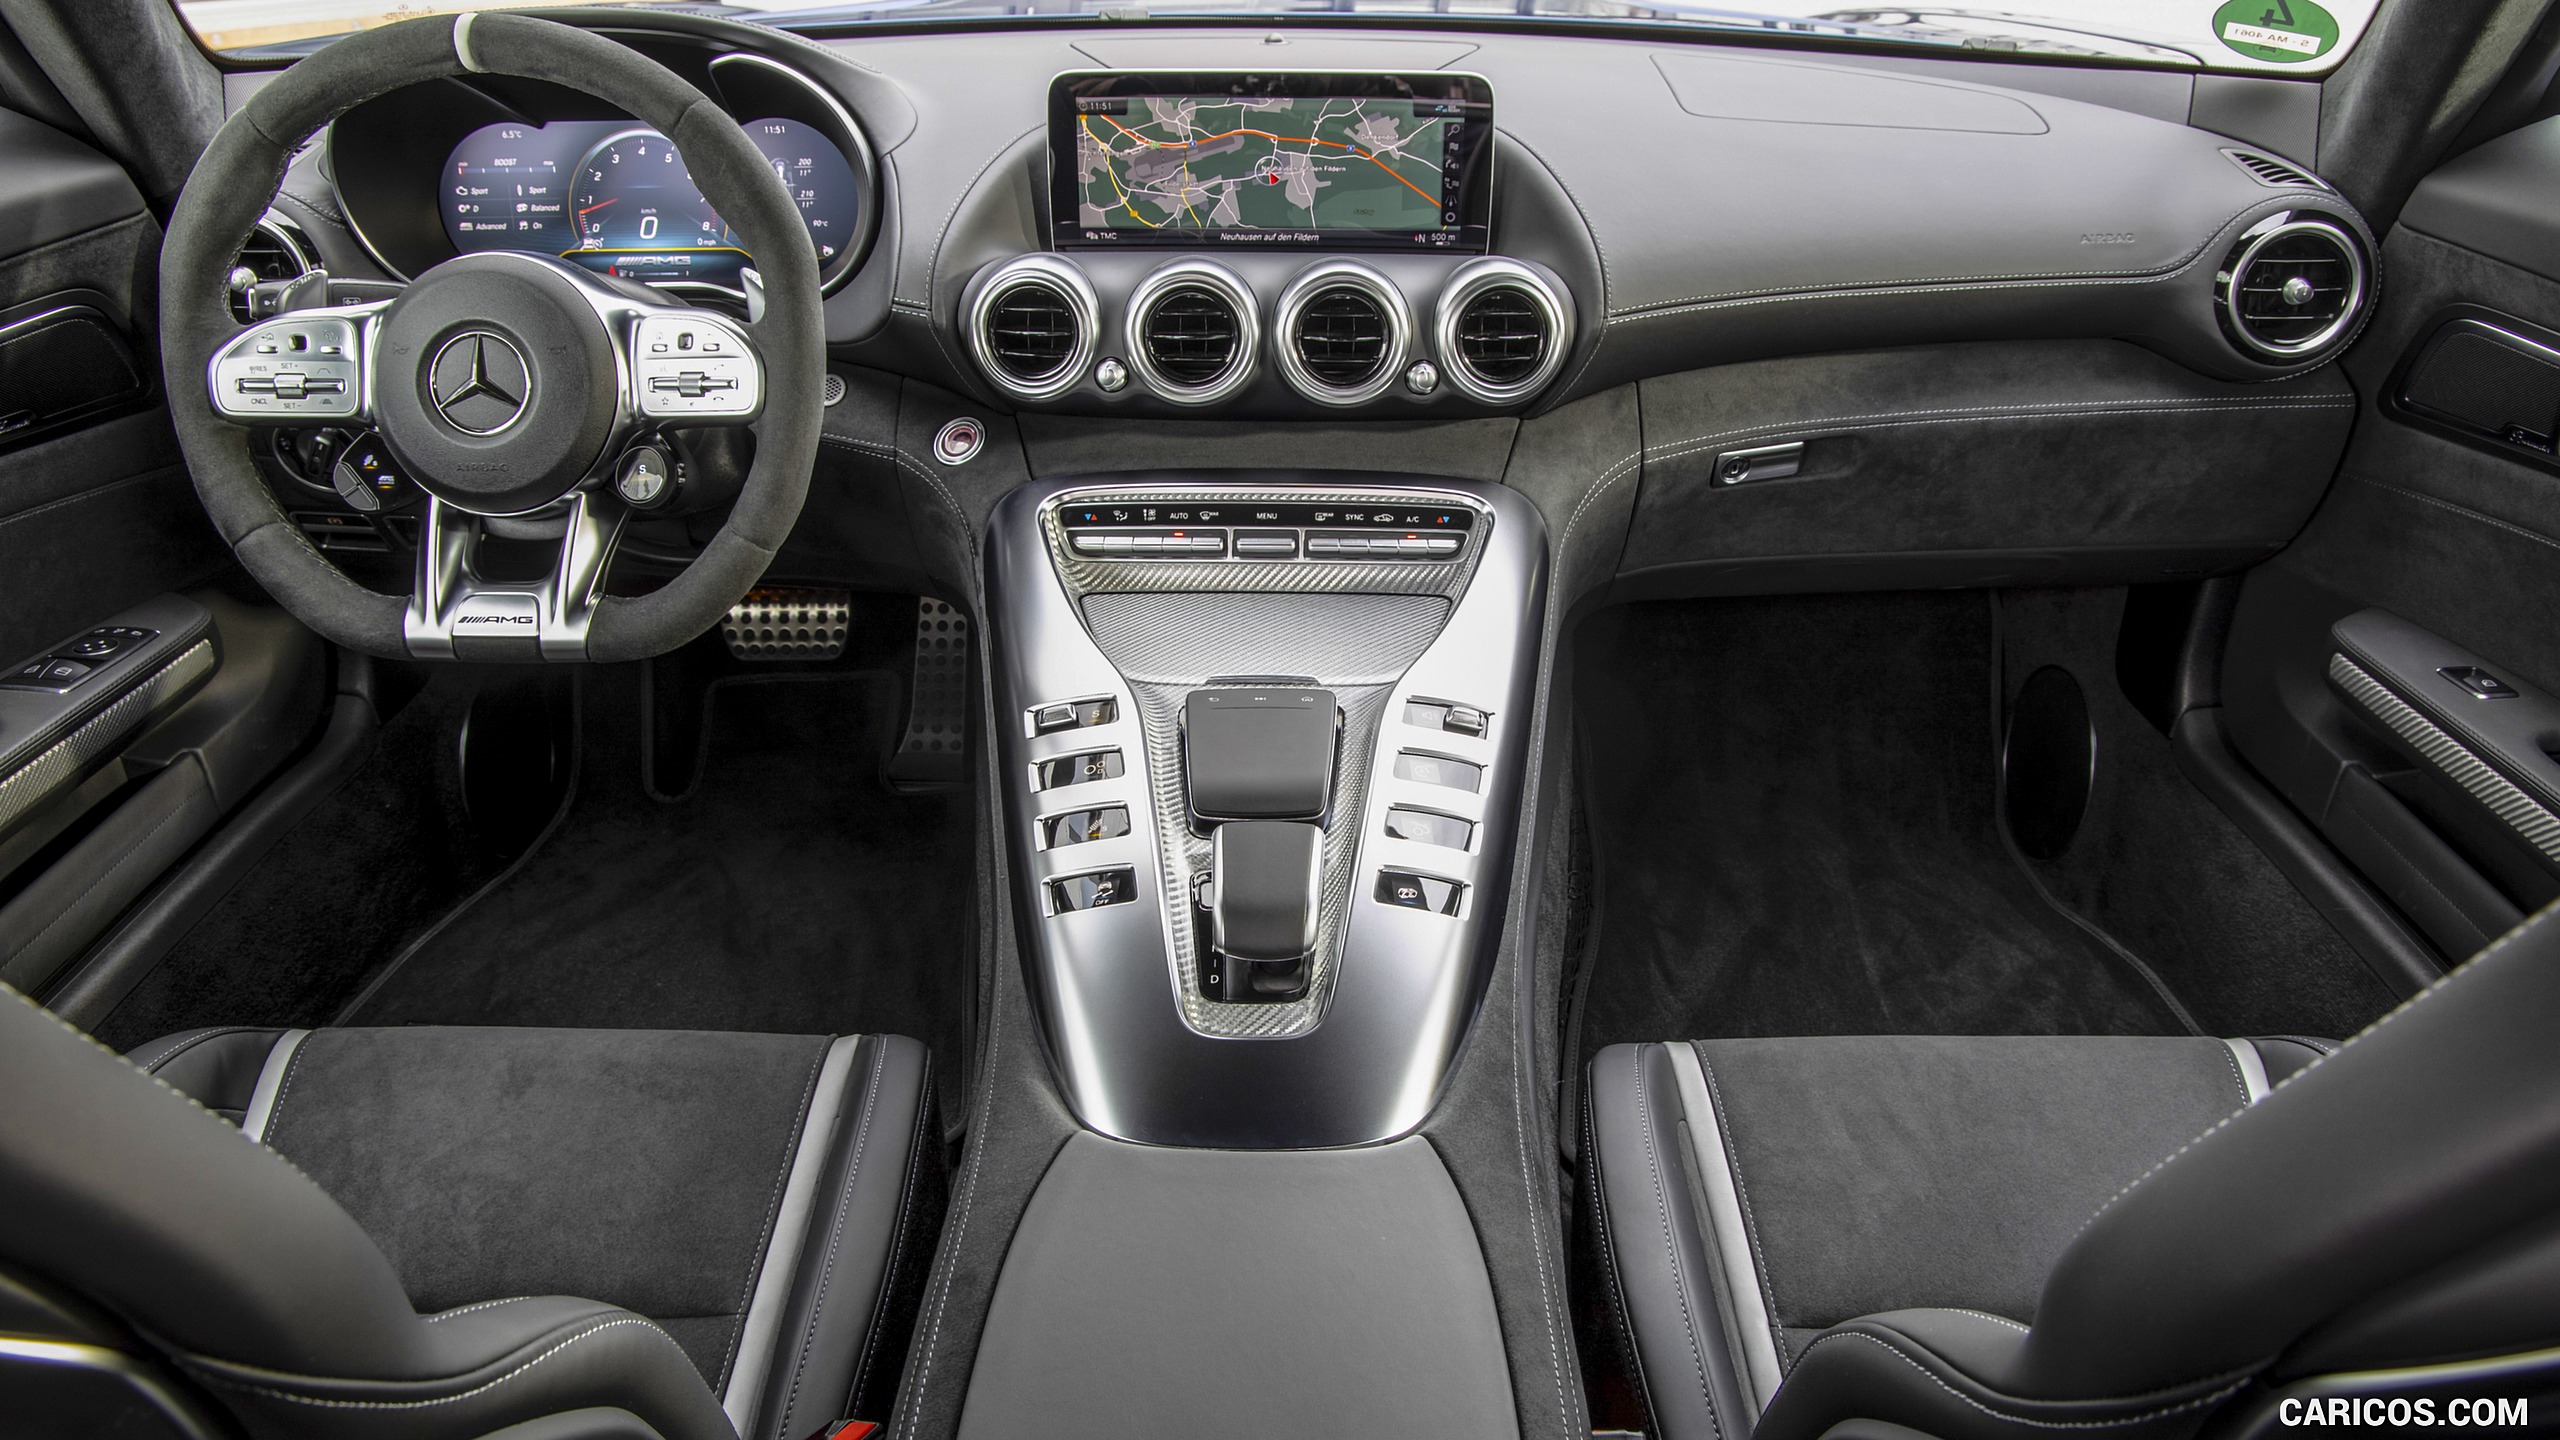 2020 Mercedes-AMG GT Coupe - Interior, Cockpit, #71 of 328